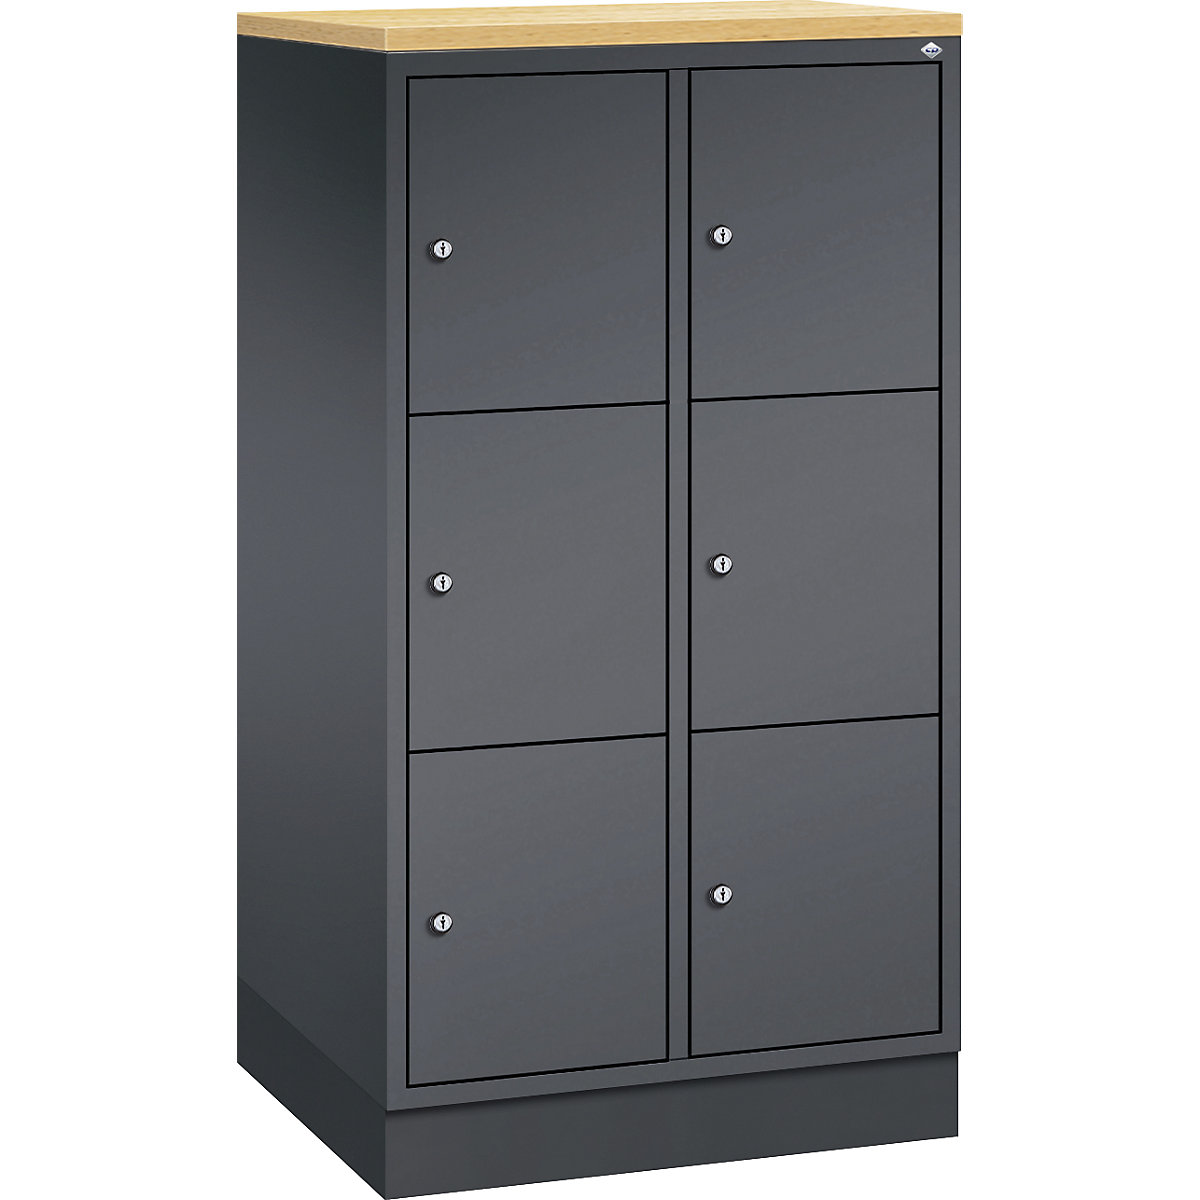 INTRO steel compartment locker, compartment height 345 mm – C+P, WxD 620 x 500 mm, 6 compartments, black grey body, black grey doors